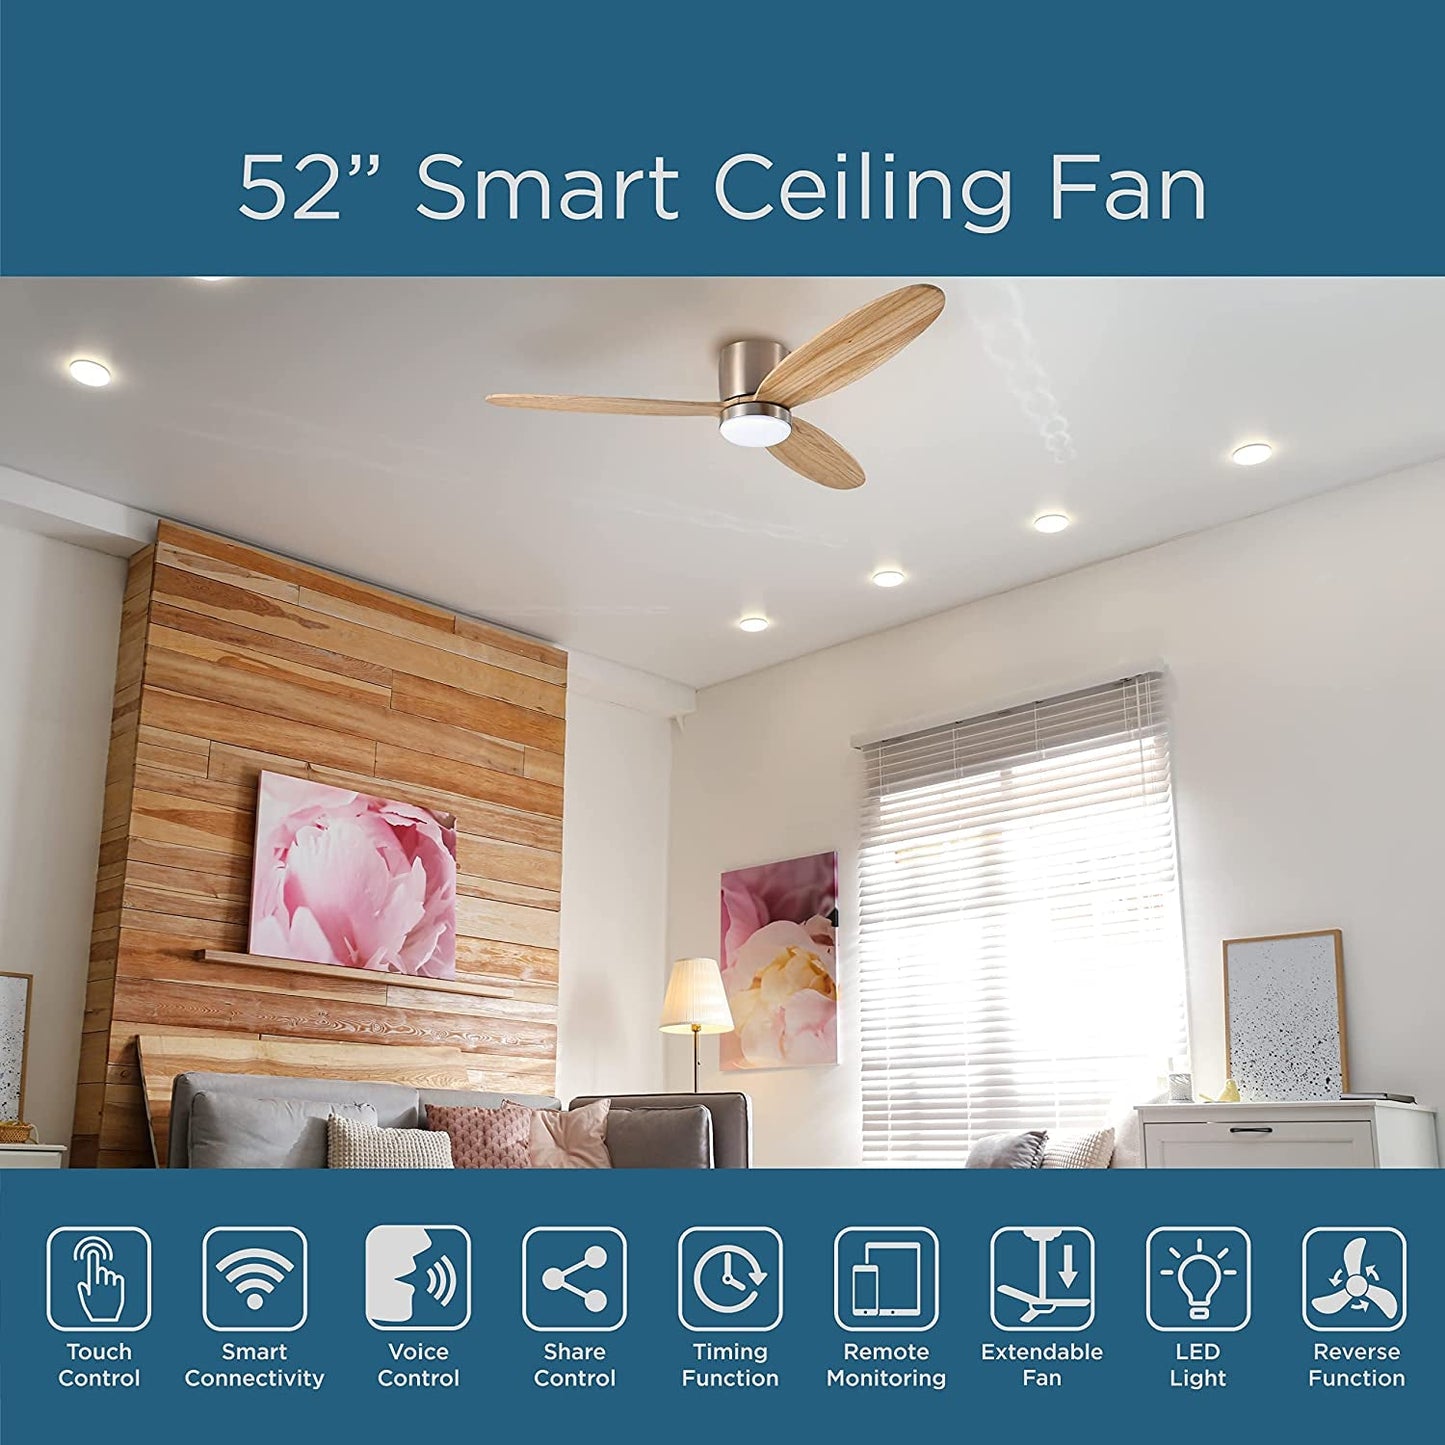 Smart Ceiling Fan 52" 3-Blade with LED Lights, High-Powered Quiet Fan with 6 Speeds and Reverse Function, Wifi Control Fan with 3 Color Temperatures, Works with Tuya Smart, Alexa and Google